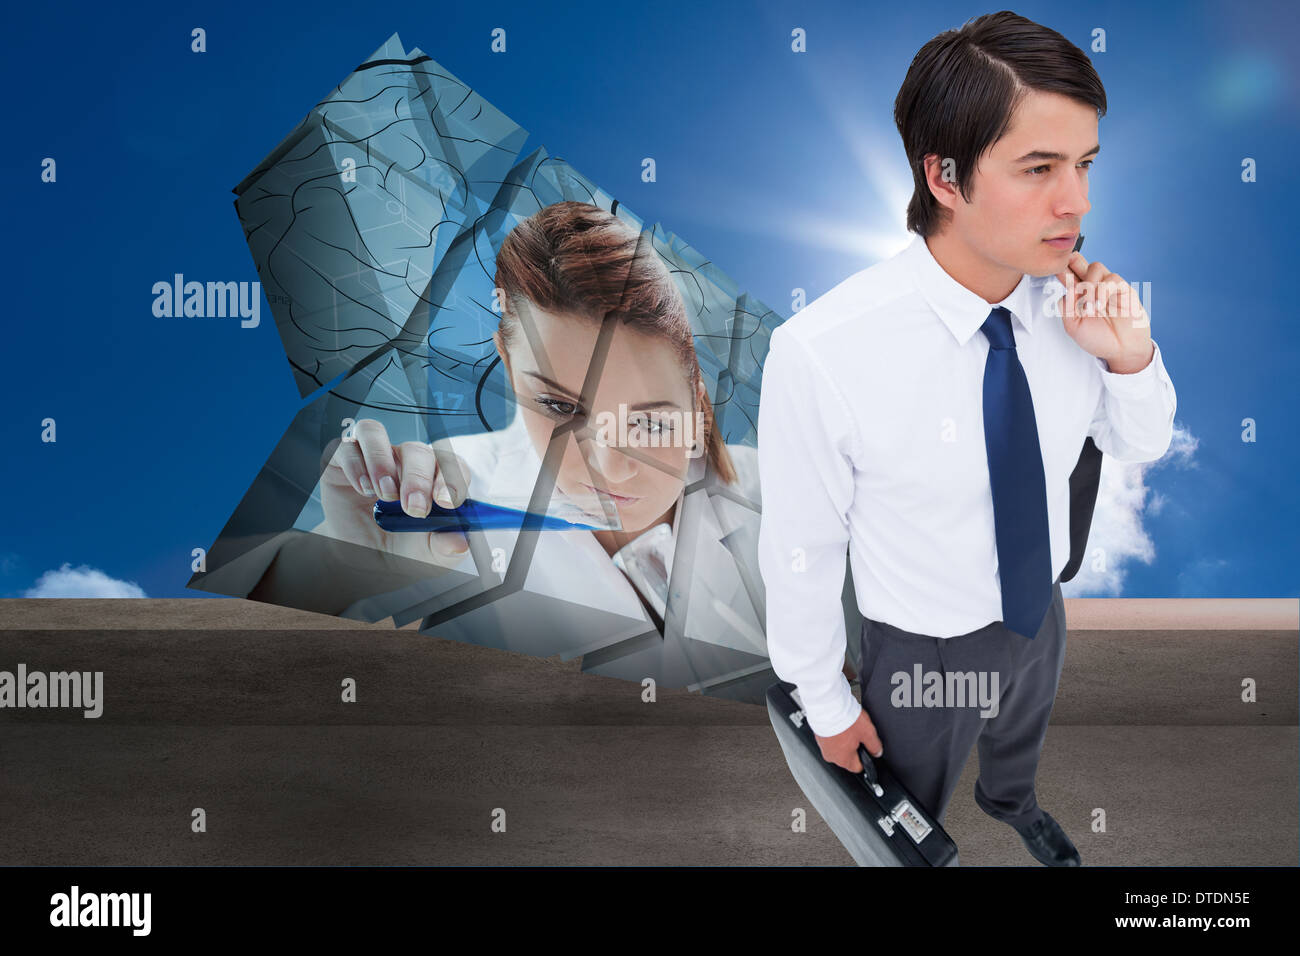 Composite image of young tradesman with his jacket and suitcase Stock Photo